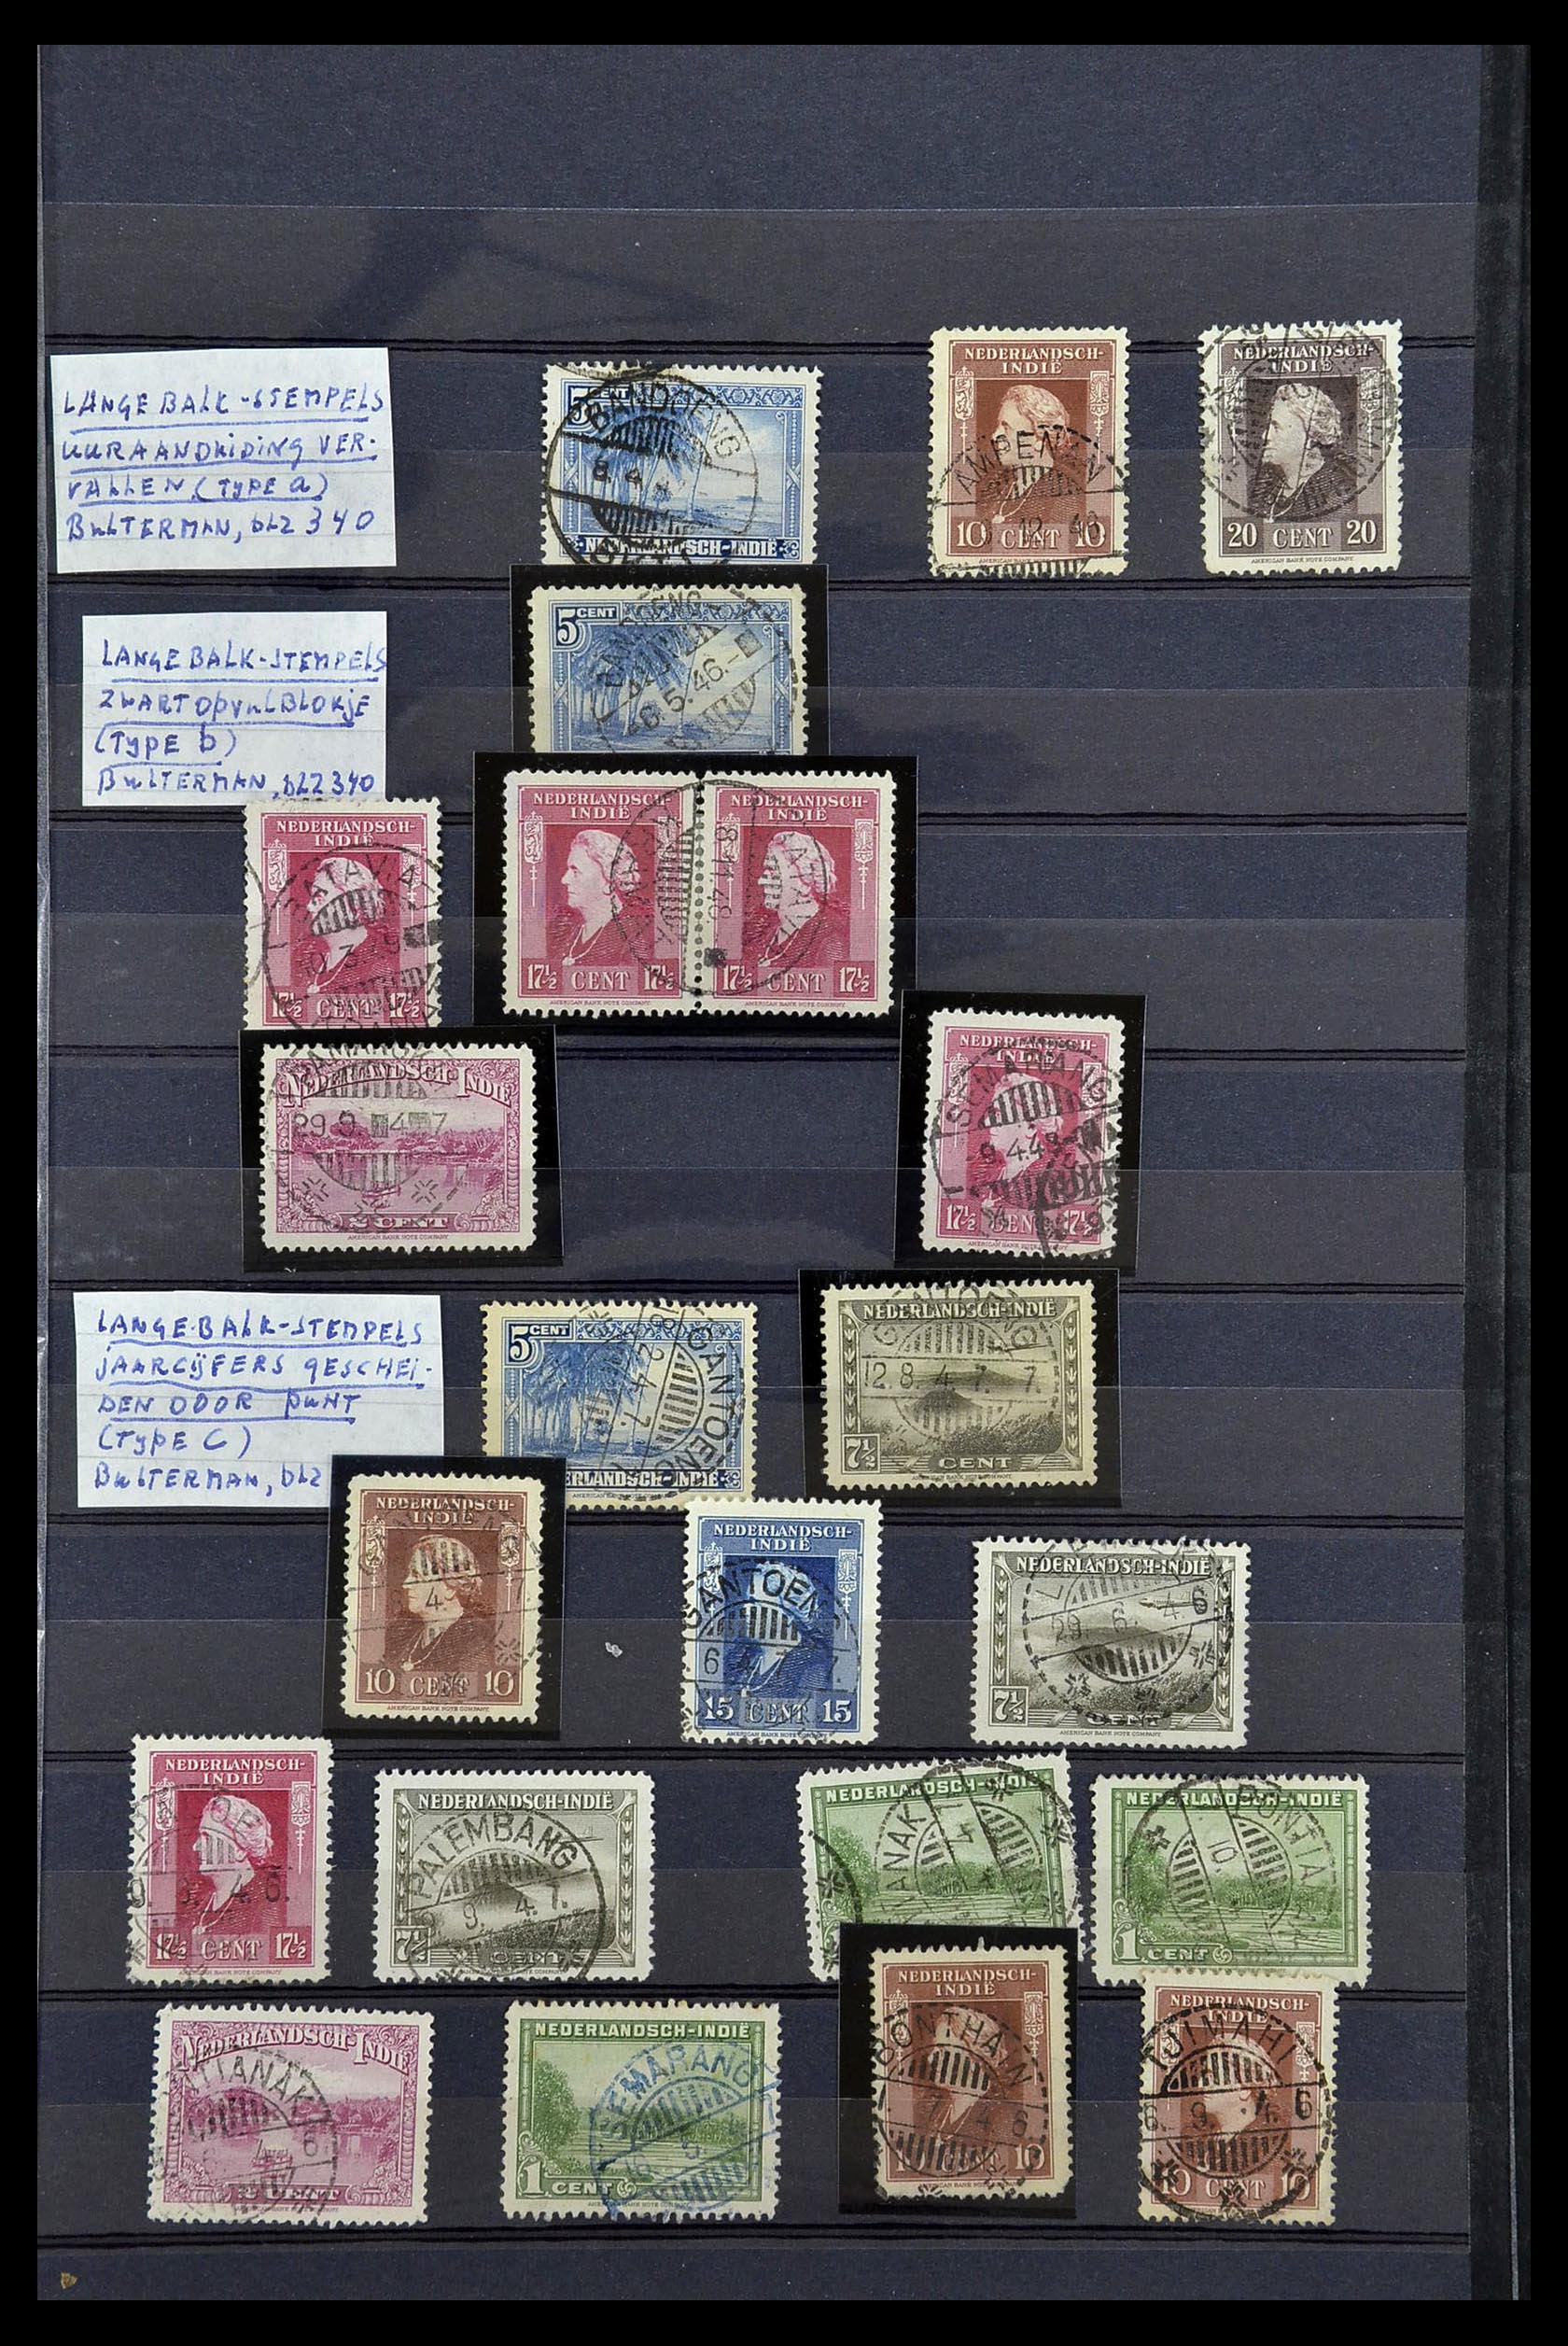 34690 031 - Stamp Collection 34690 Dutch east Indies cancels.